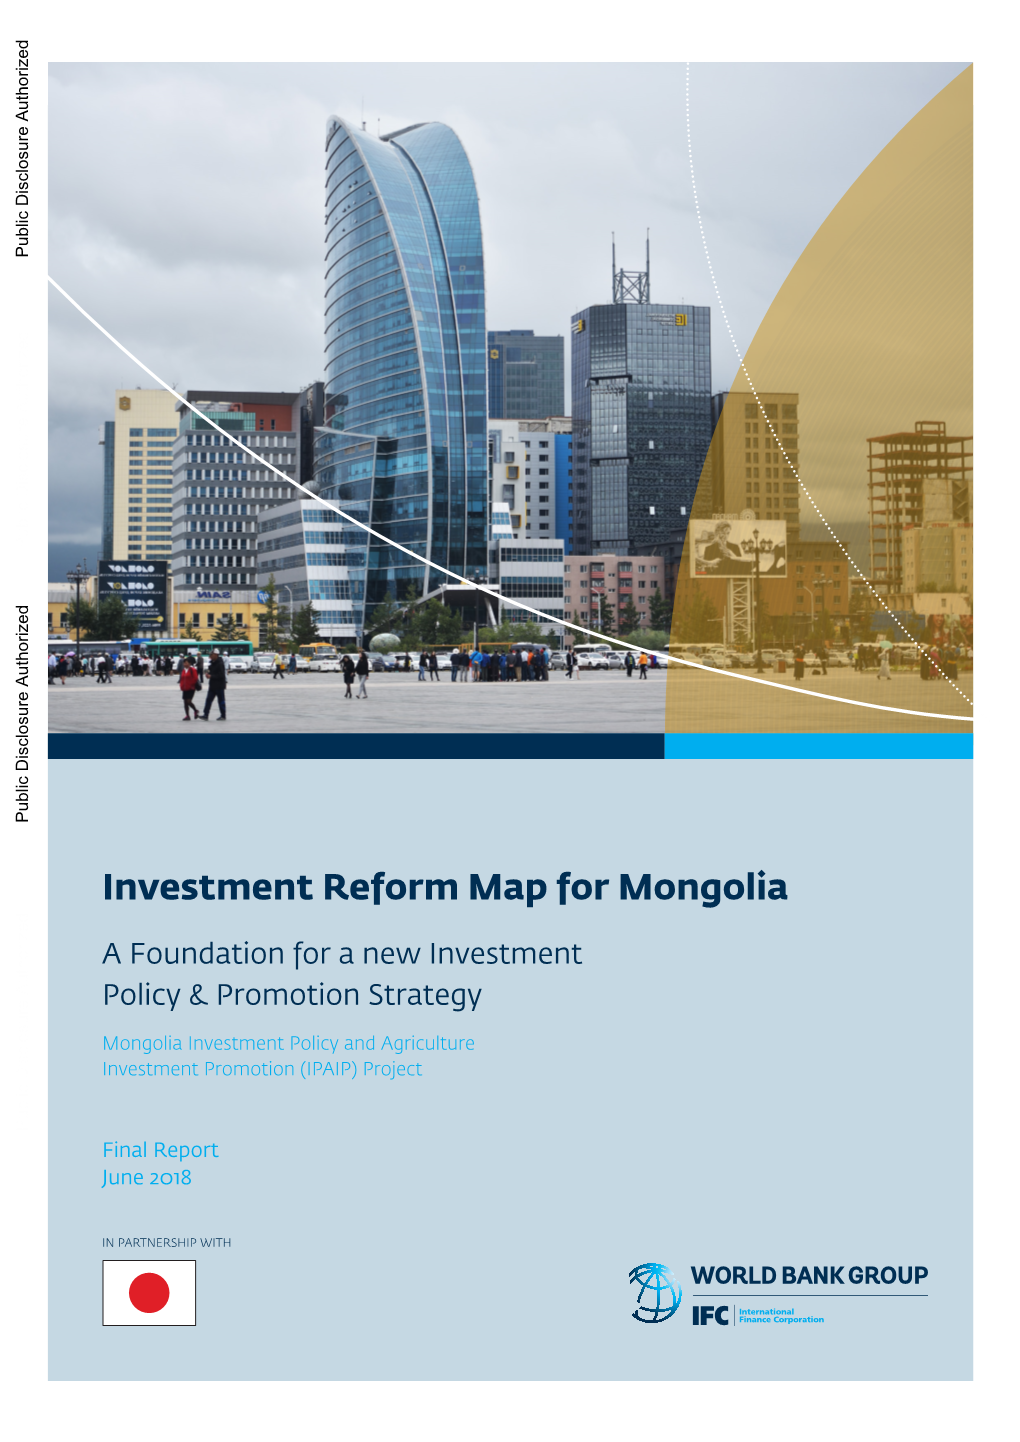 Investment Reform Map for Mongolia